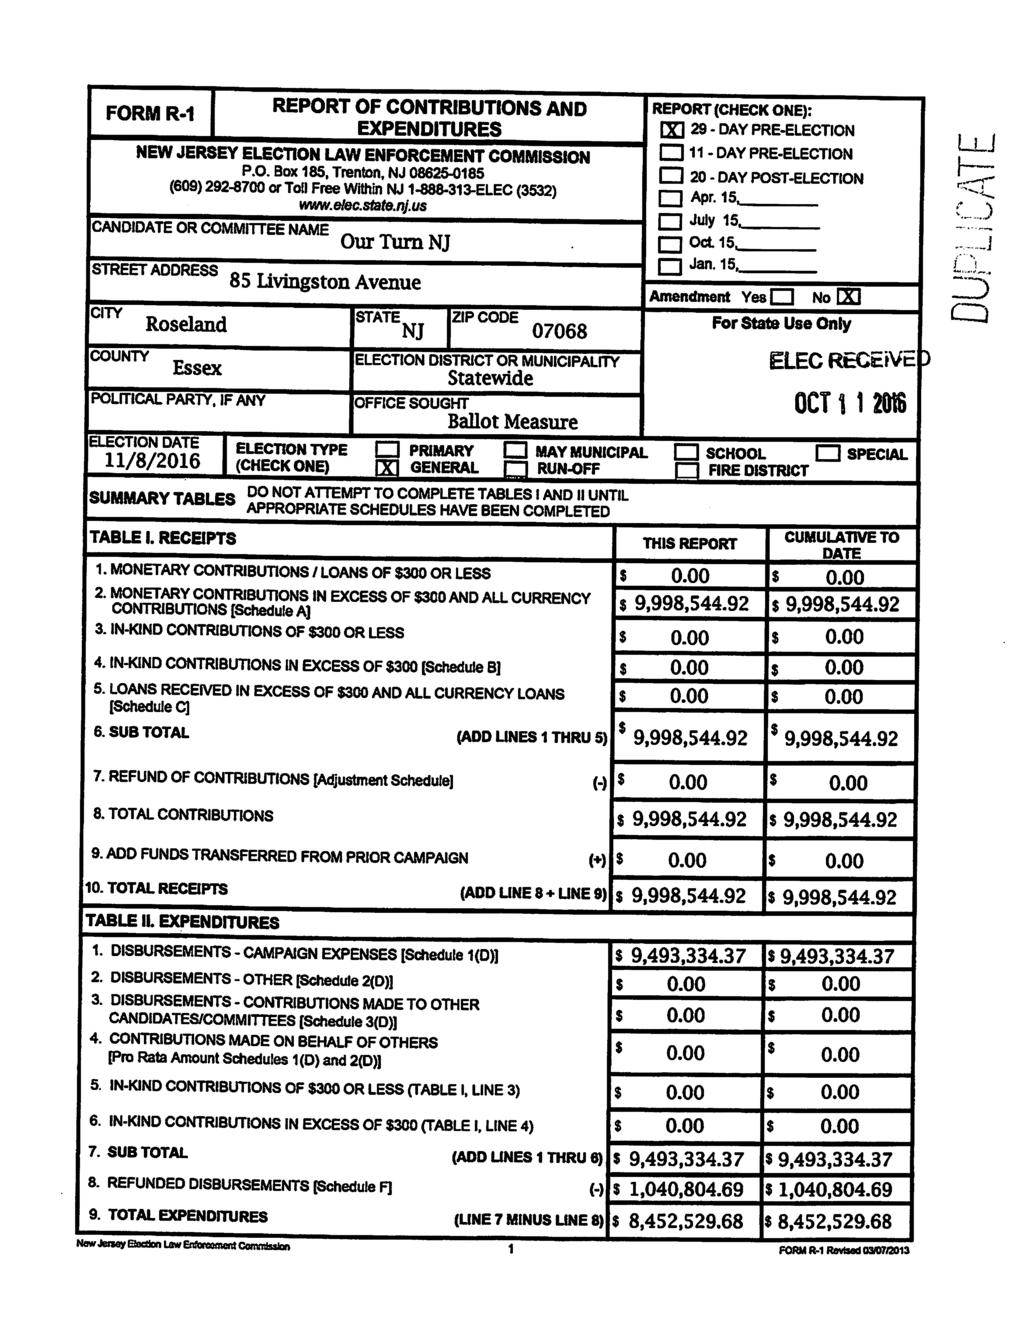 FORM R-1 REPORT OF NTRIBUTIONS AND EXPENDITURES NEW JERSEY ELECTION LAW ENFORCEMENT MMISSION P.O. Bx 185, Trentn, NJ 08625^185 (609) 292-8700 r Tl Free Within NJ 1-888-313-ELEC (3532) www.elec.state.